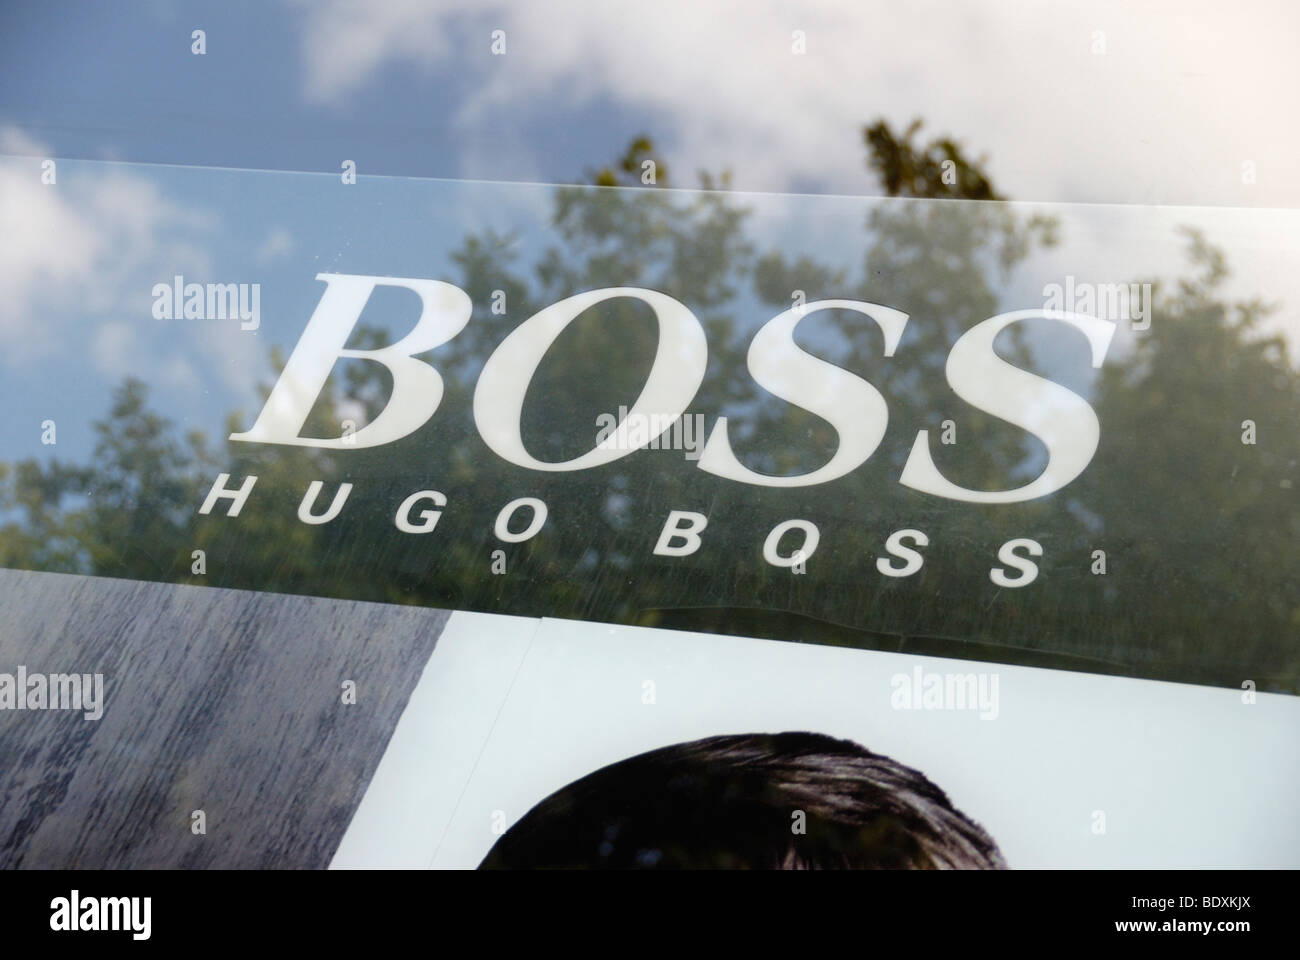 boss sign in